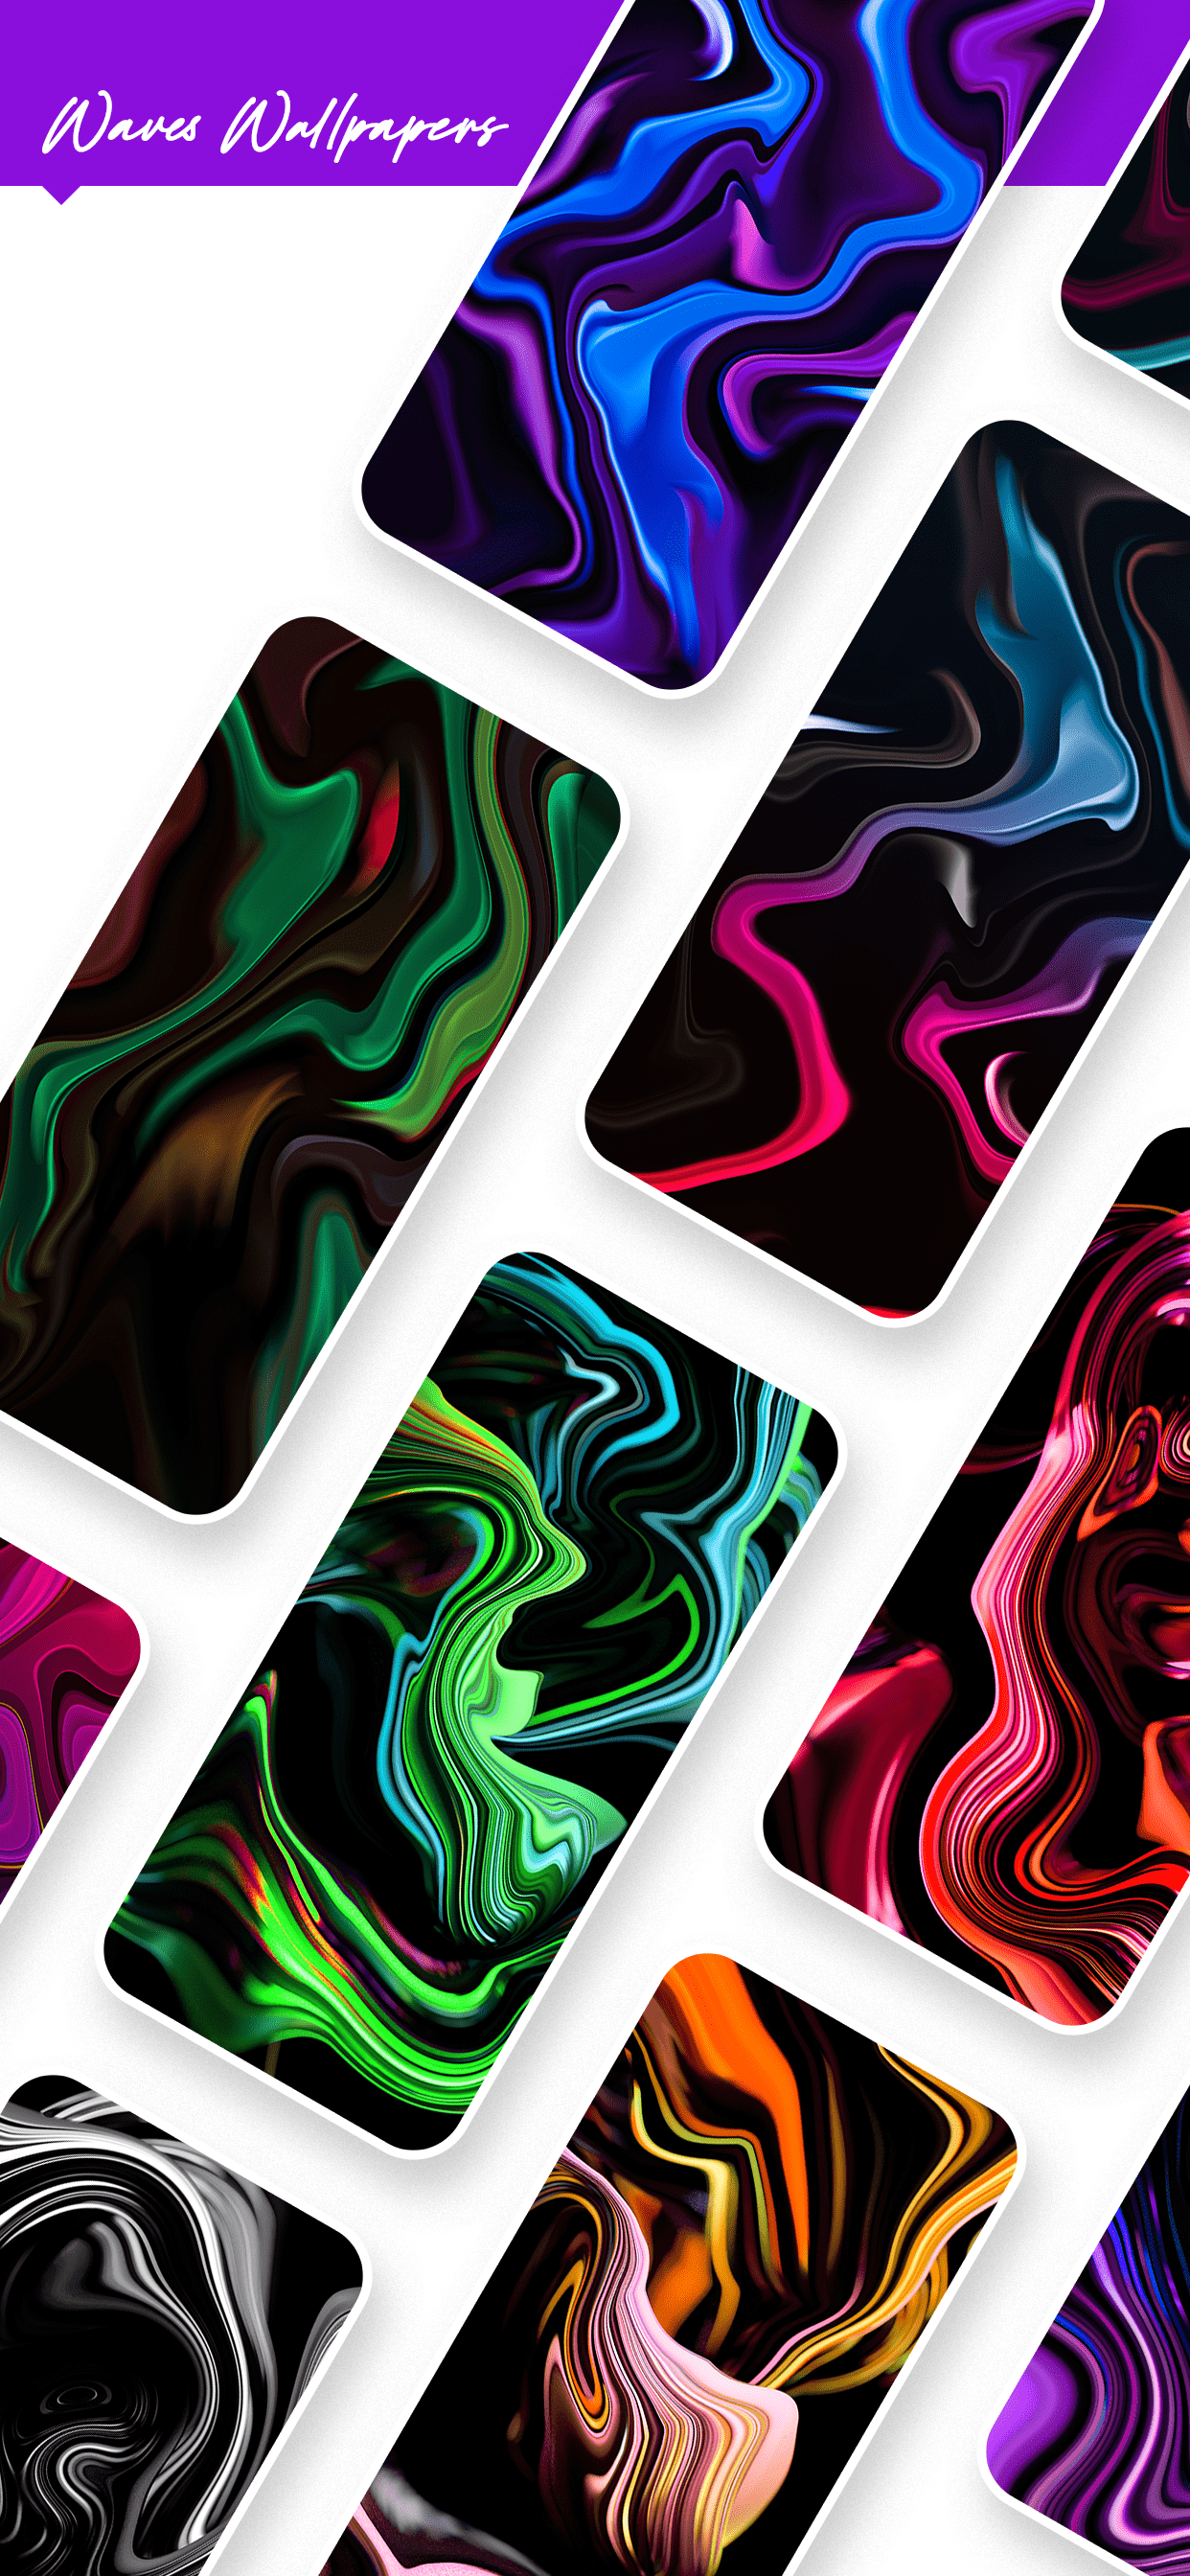 Waves-Wallpapers-3.png